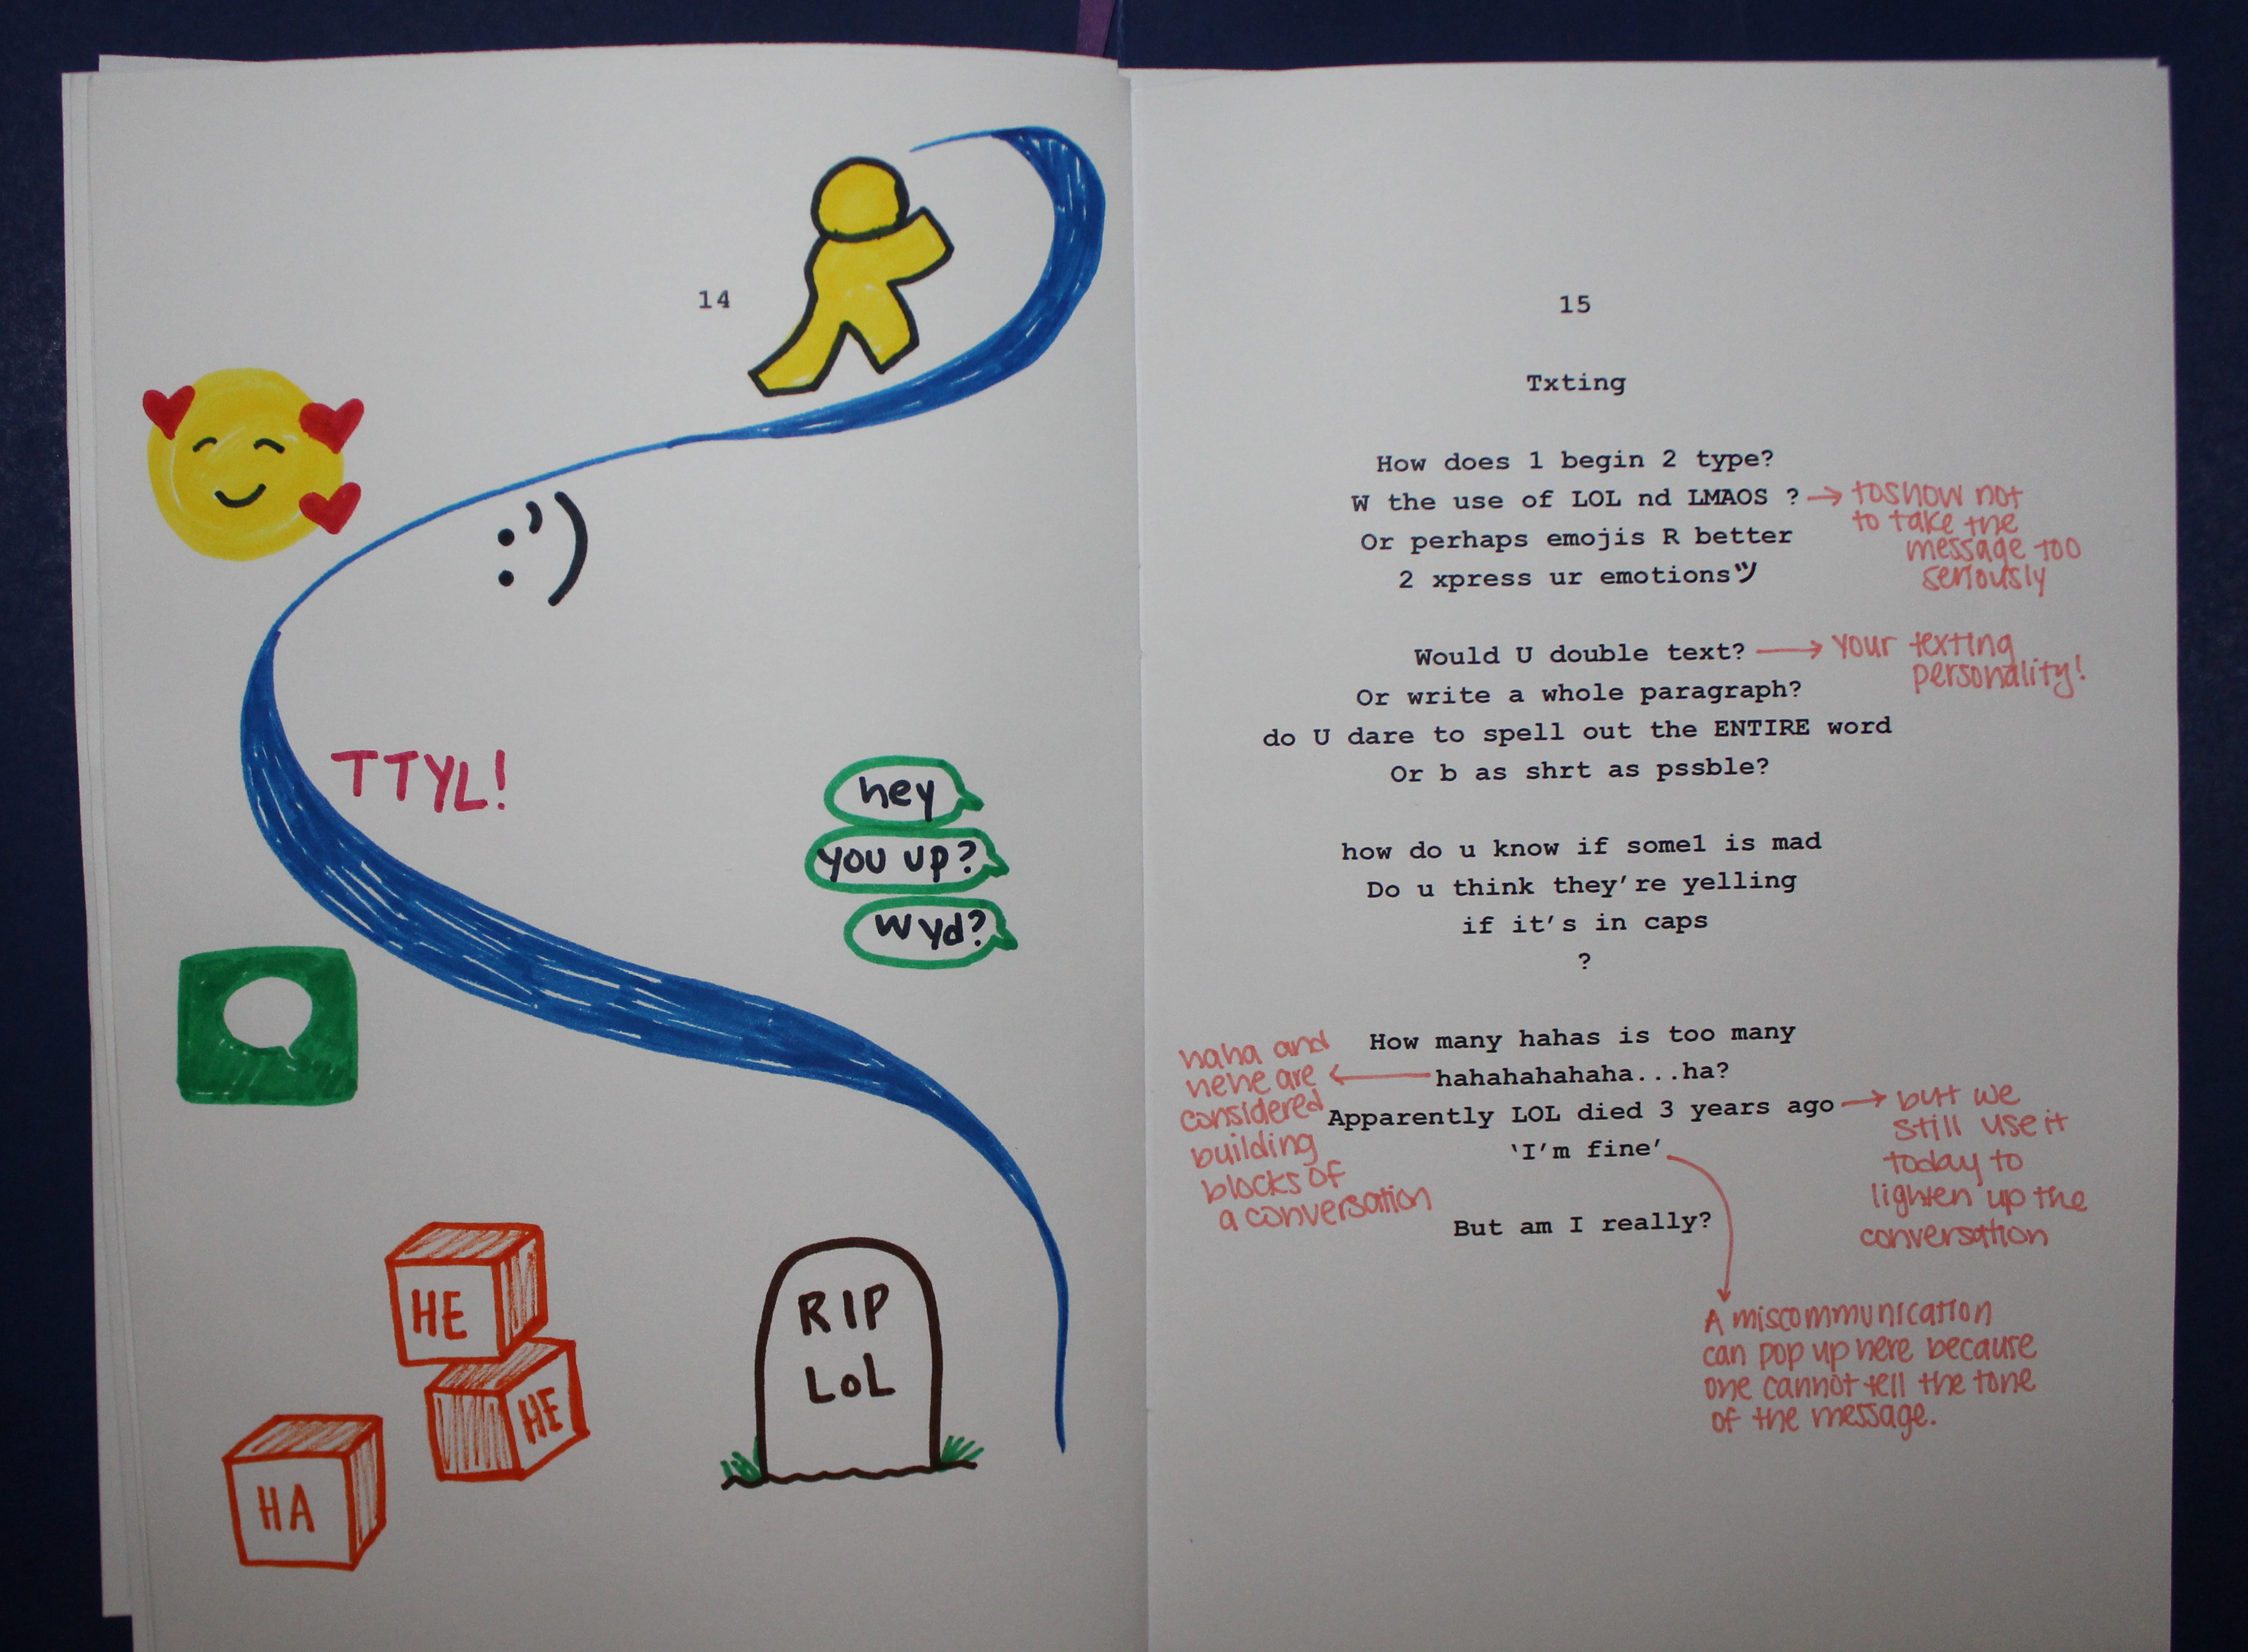 Page9: Original poem about text messaging behaviors accompanied by an illustration